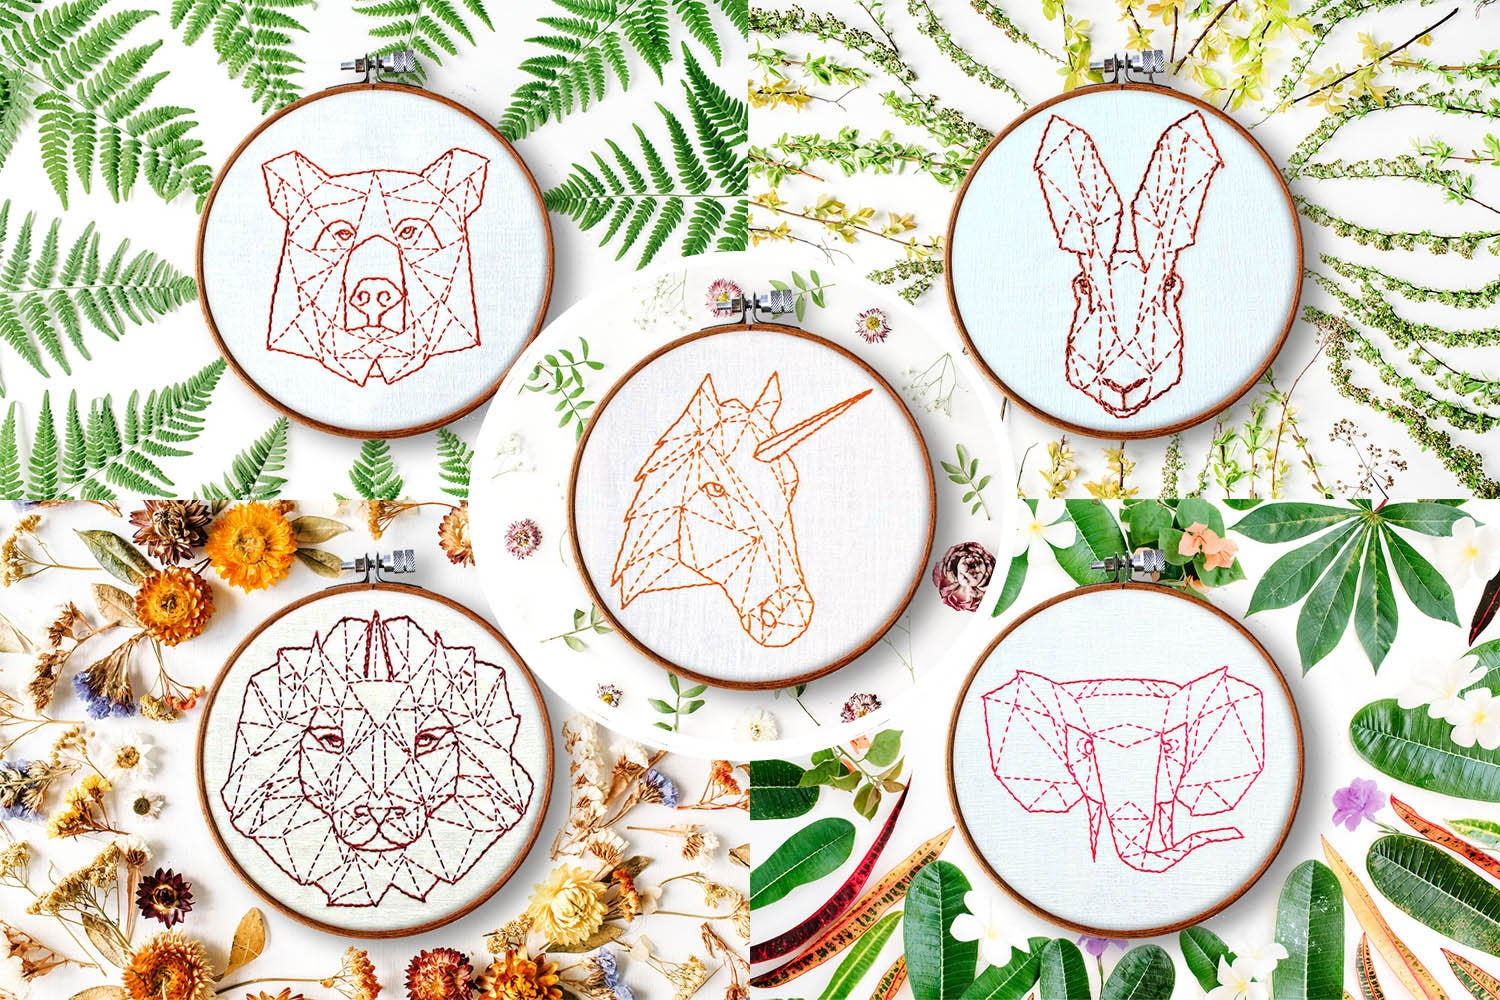 How To Make Hand Embroidery Patterns Modern Hand Embroidery Patterns Geometric Animals Beginner Embroidery Embroidery Ideas Contemporary Embroidery Rustic Home Decor